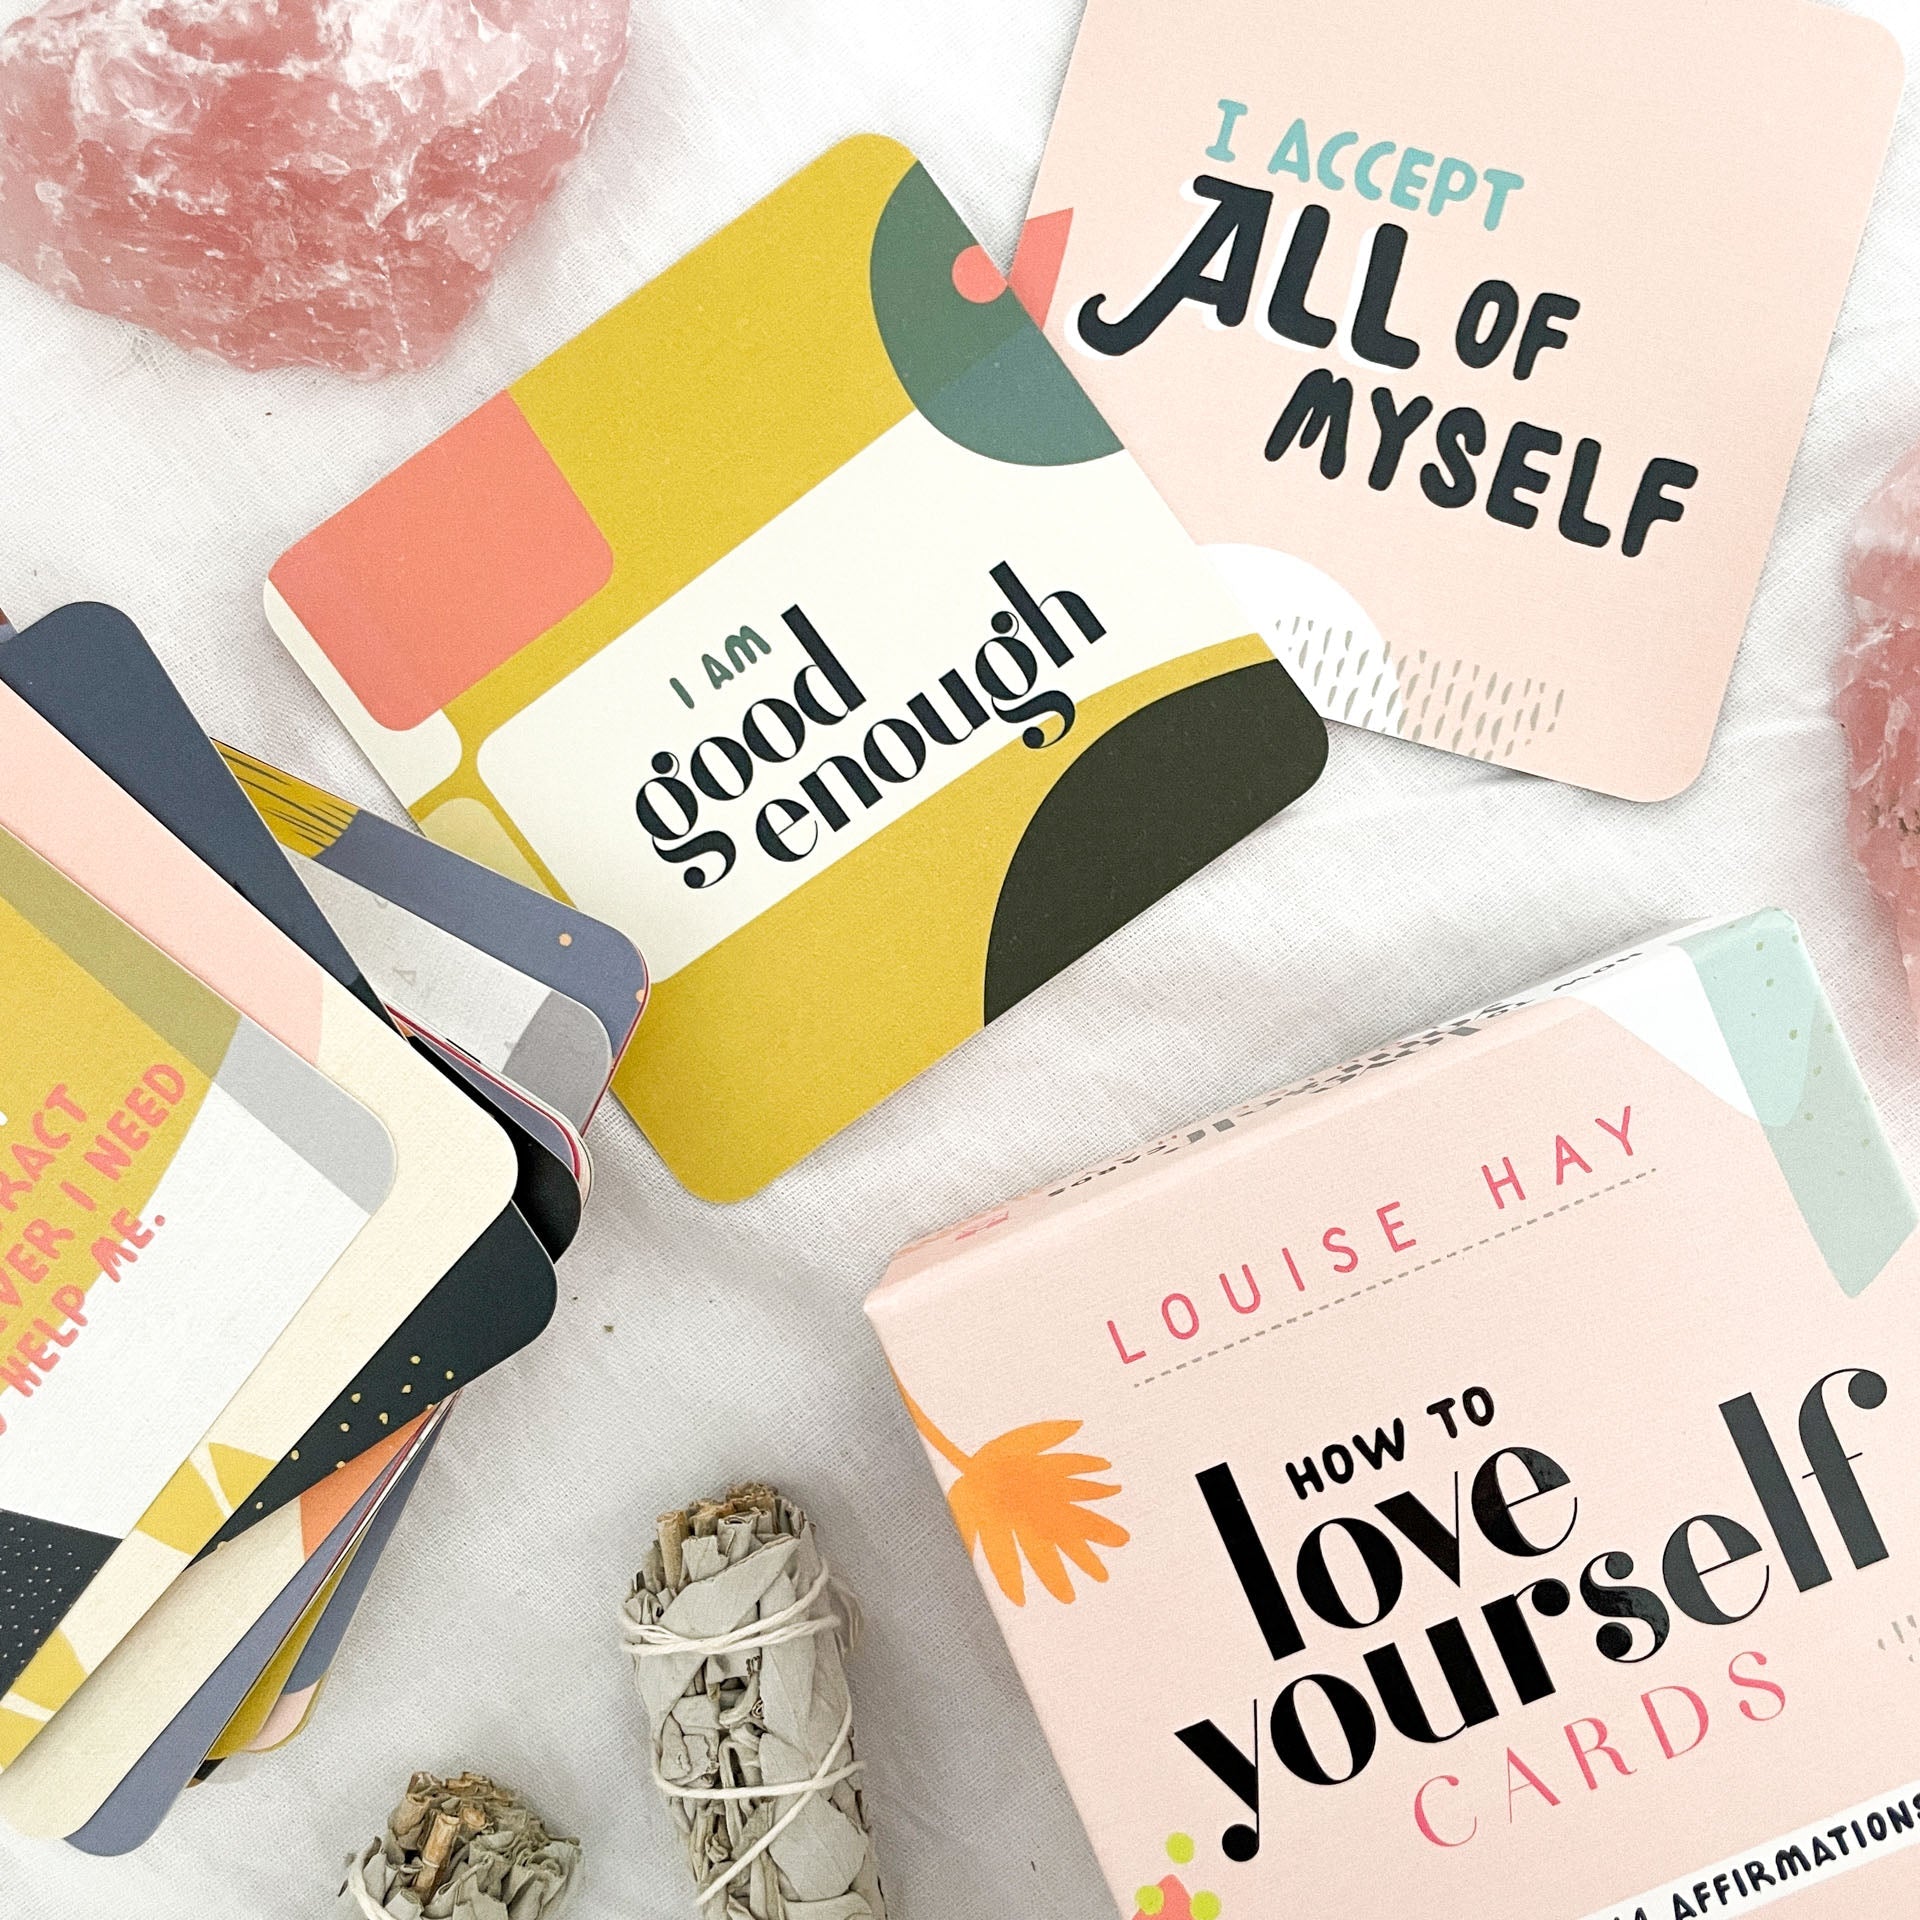 How to love yourself cards | Affirmasjonskort | Louise Hay-the-feelgood-shop